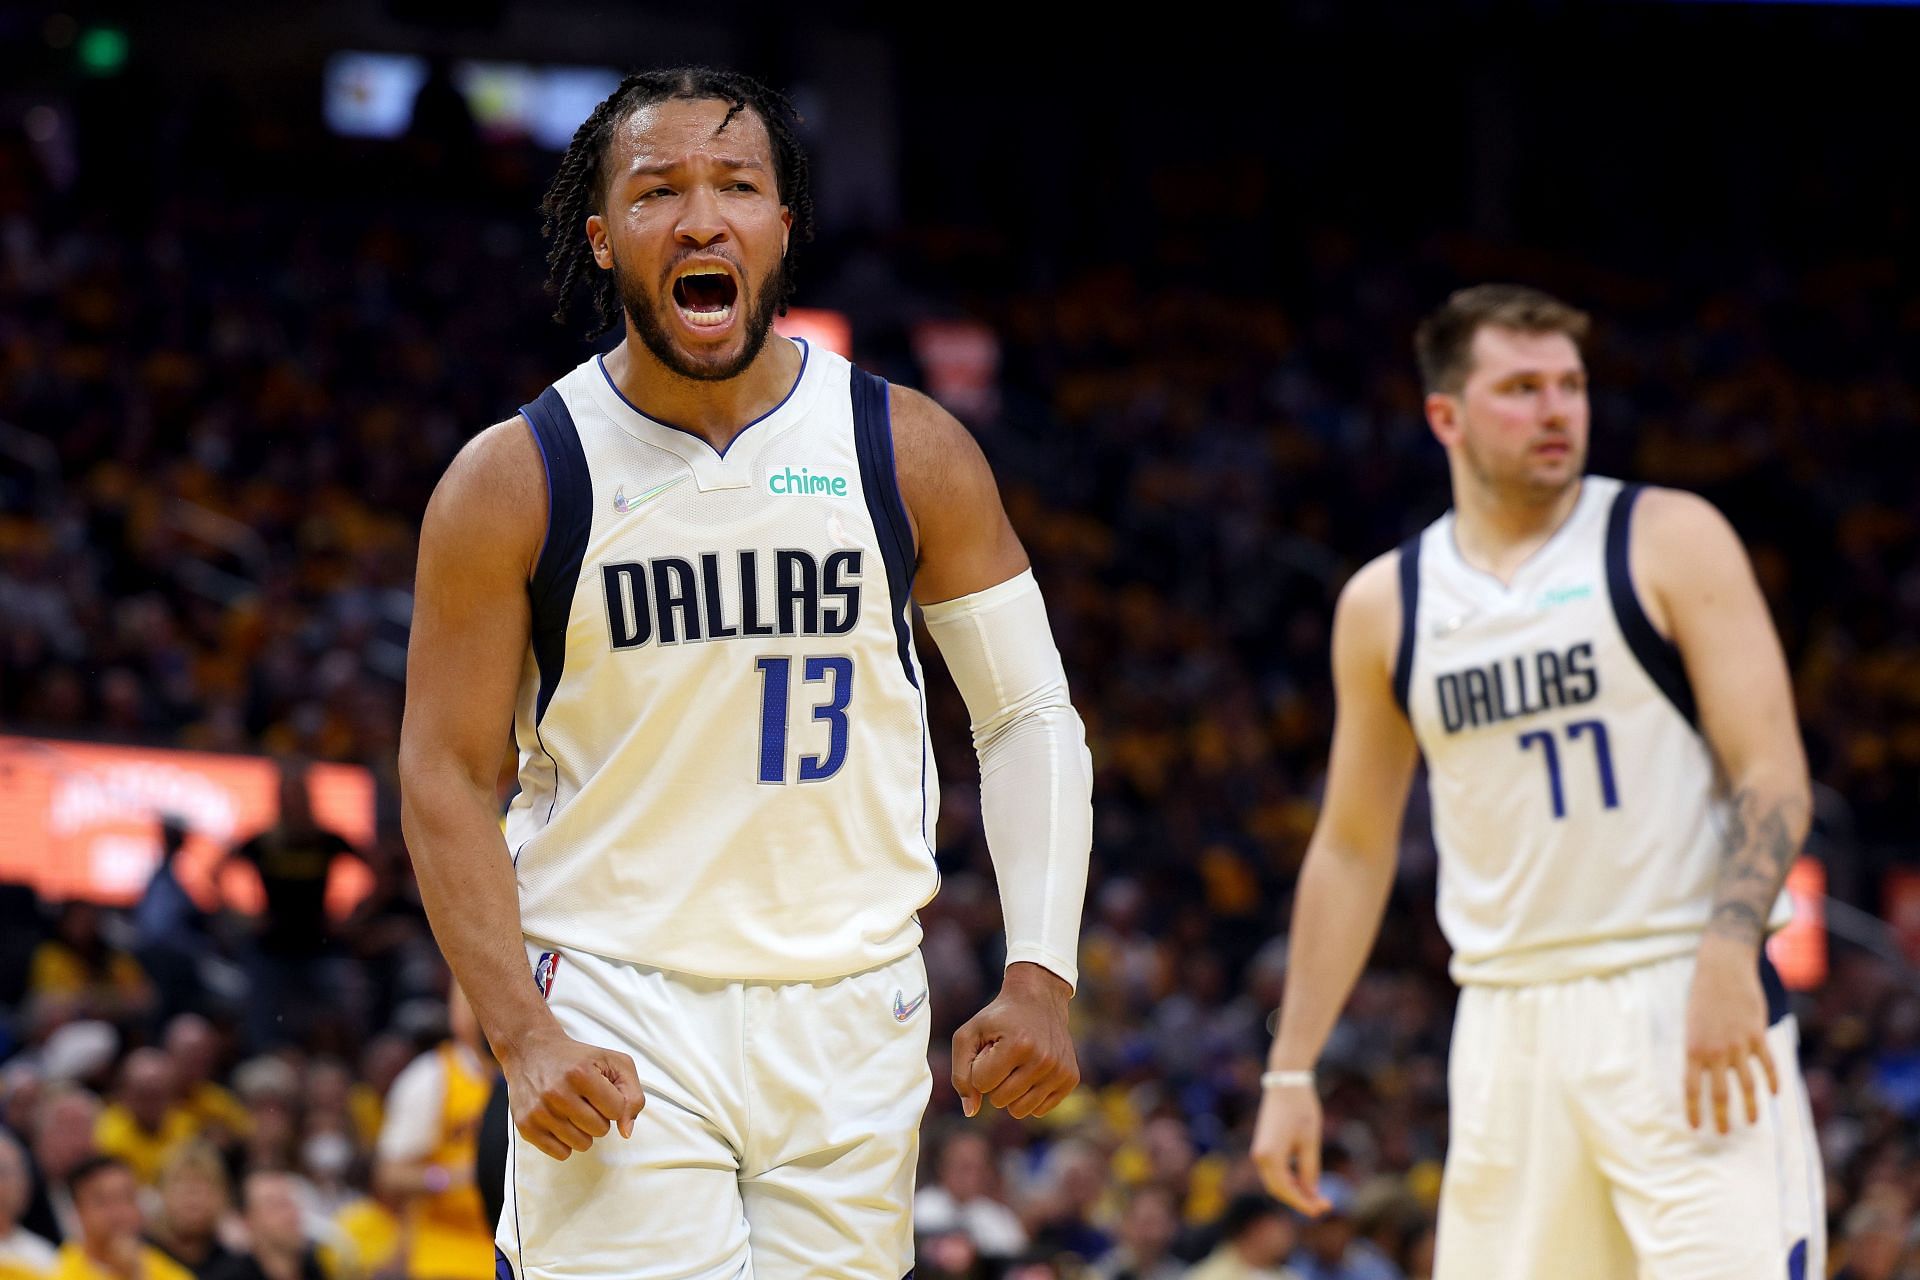 Jalen Brunson is rumored to be signing with the New York Knicks